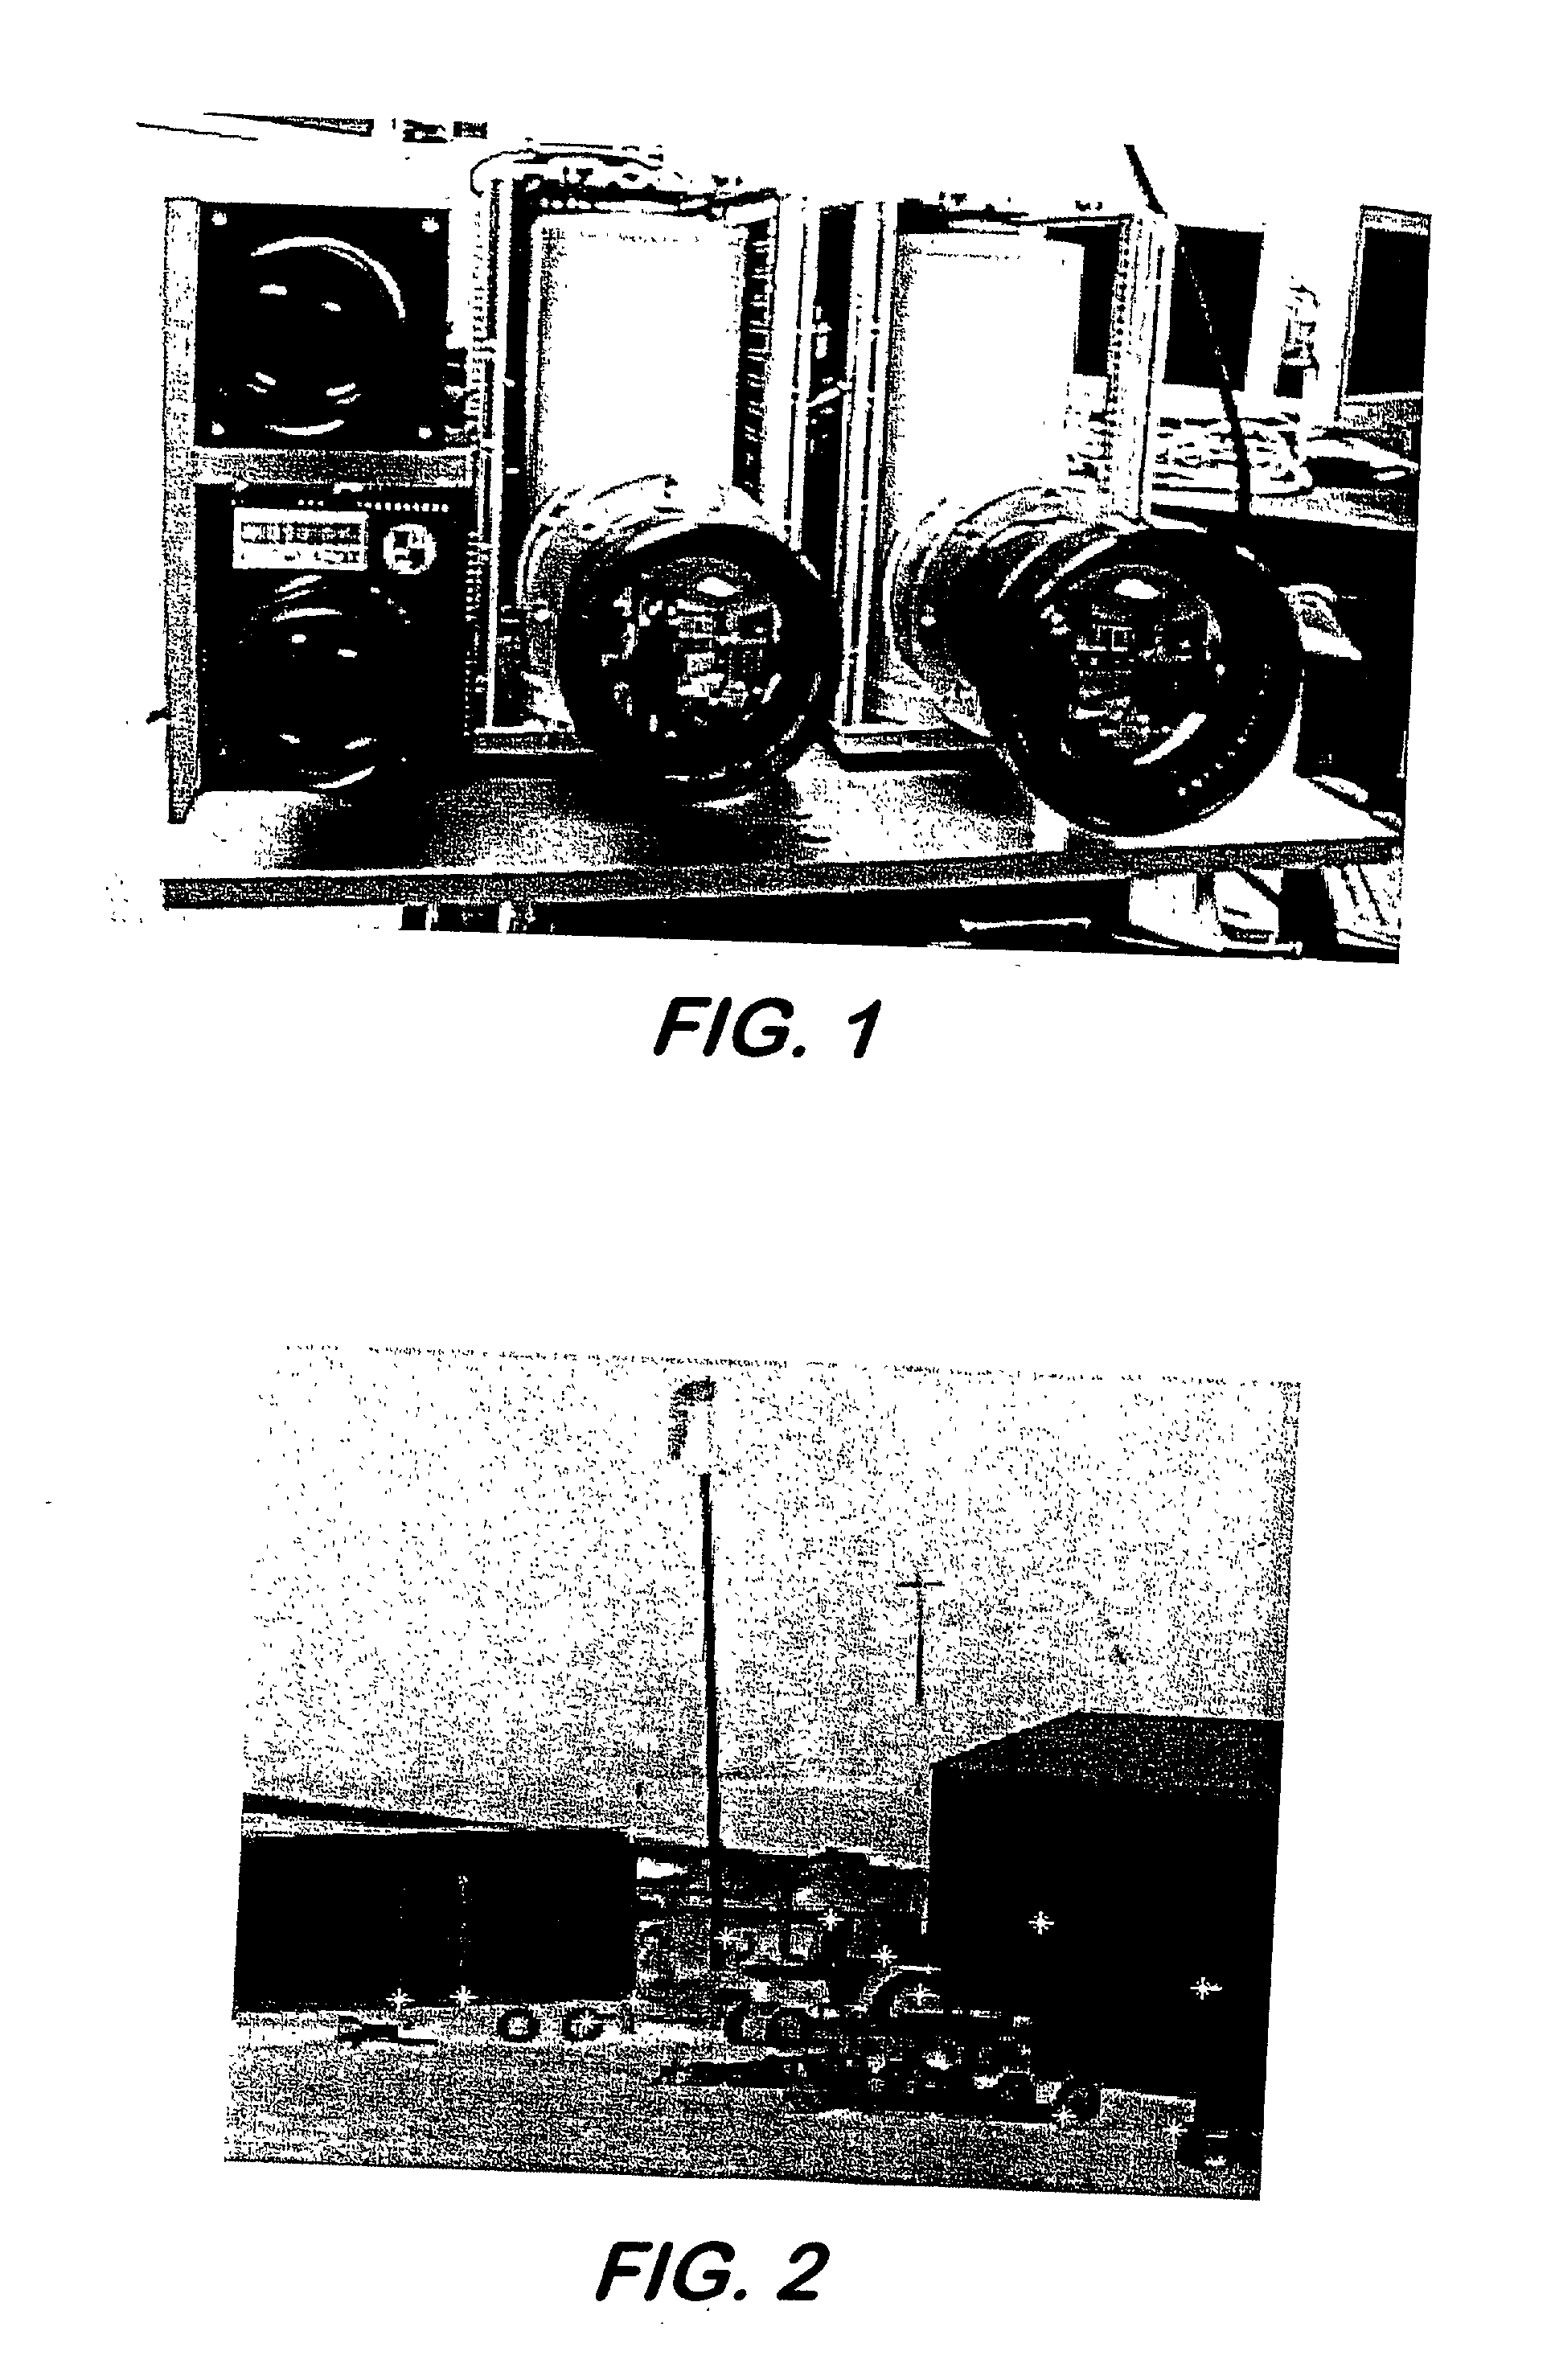 Method and apparatus for tie-point registration of disparate imaging sensors by matching optical flow